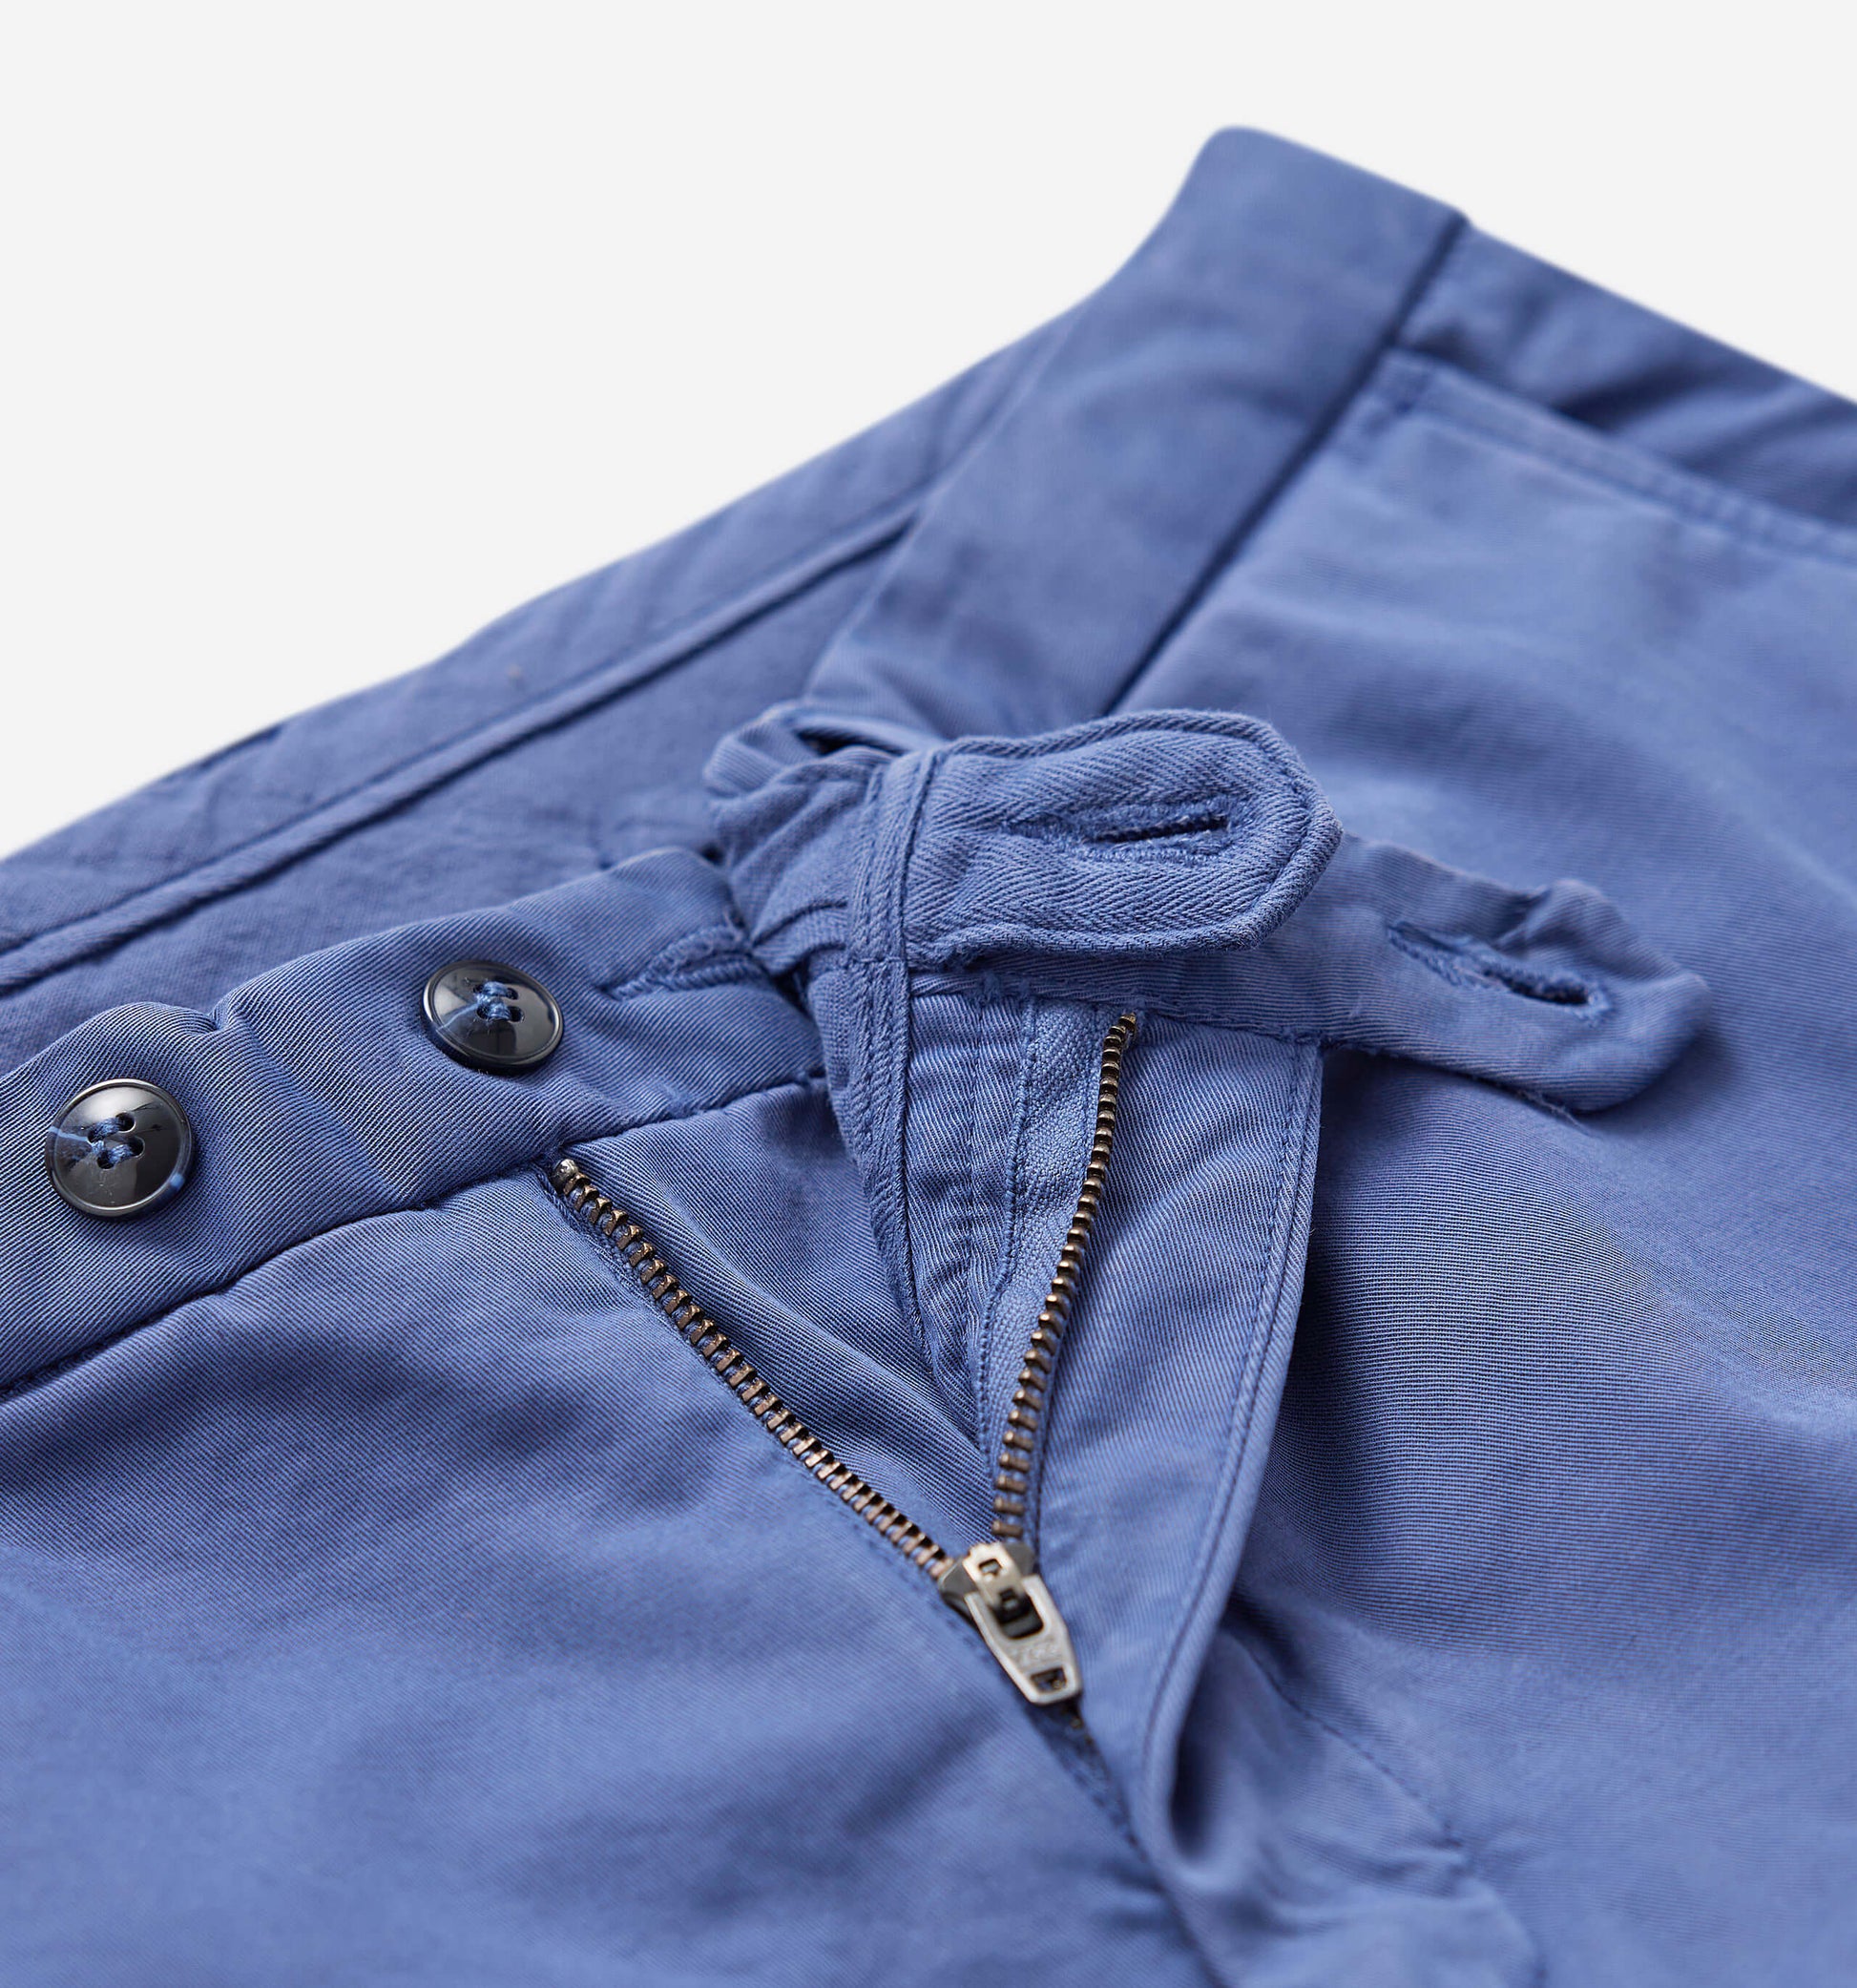 The Harry - Cotton-Stretch Chino In Blue From King Essentials